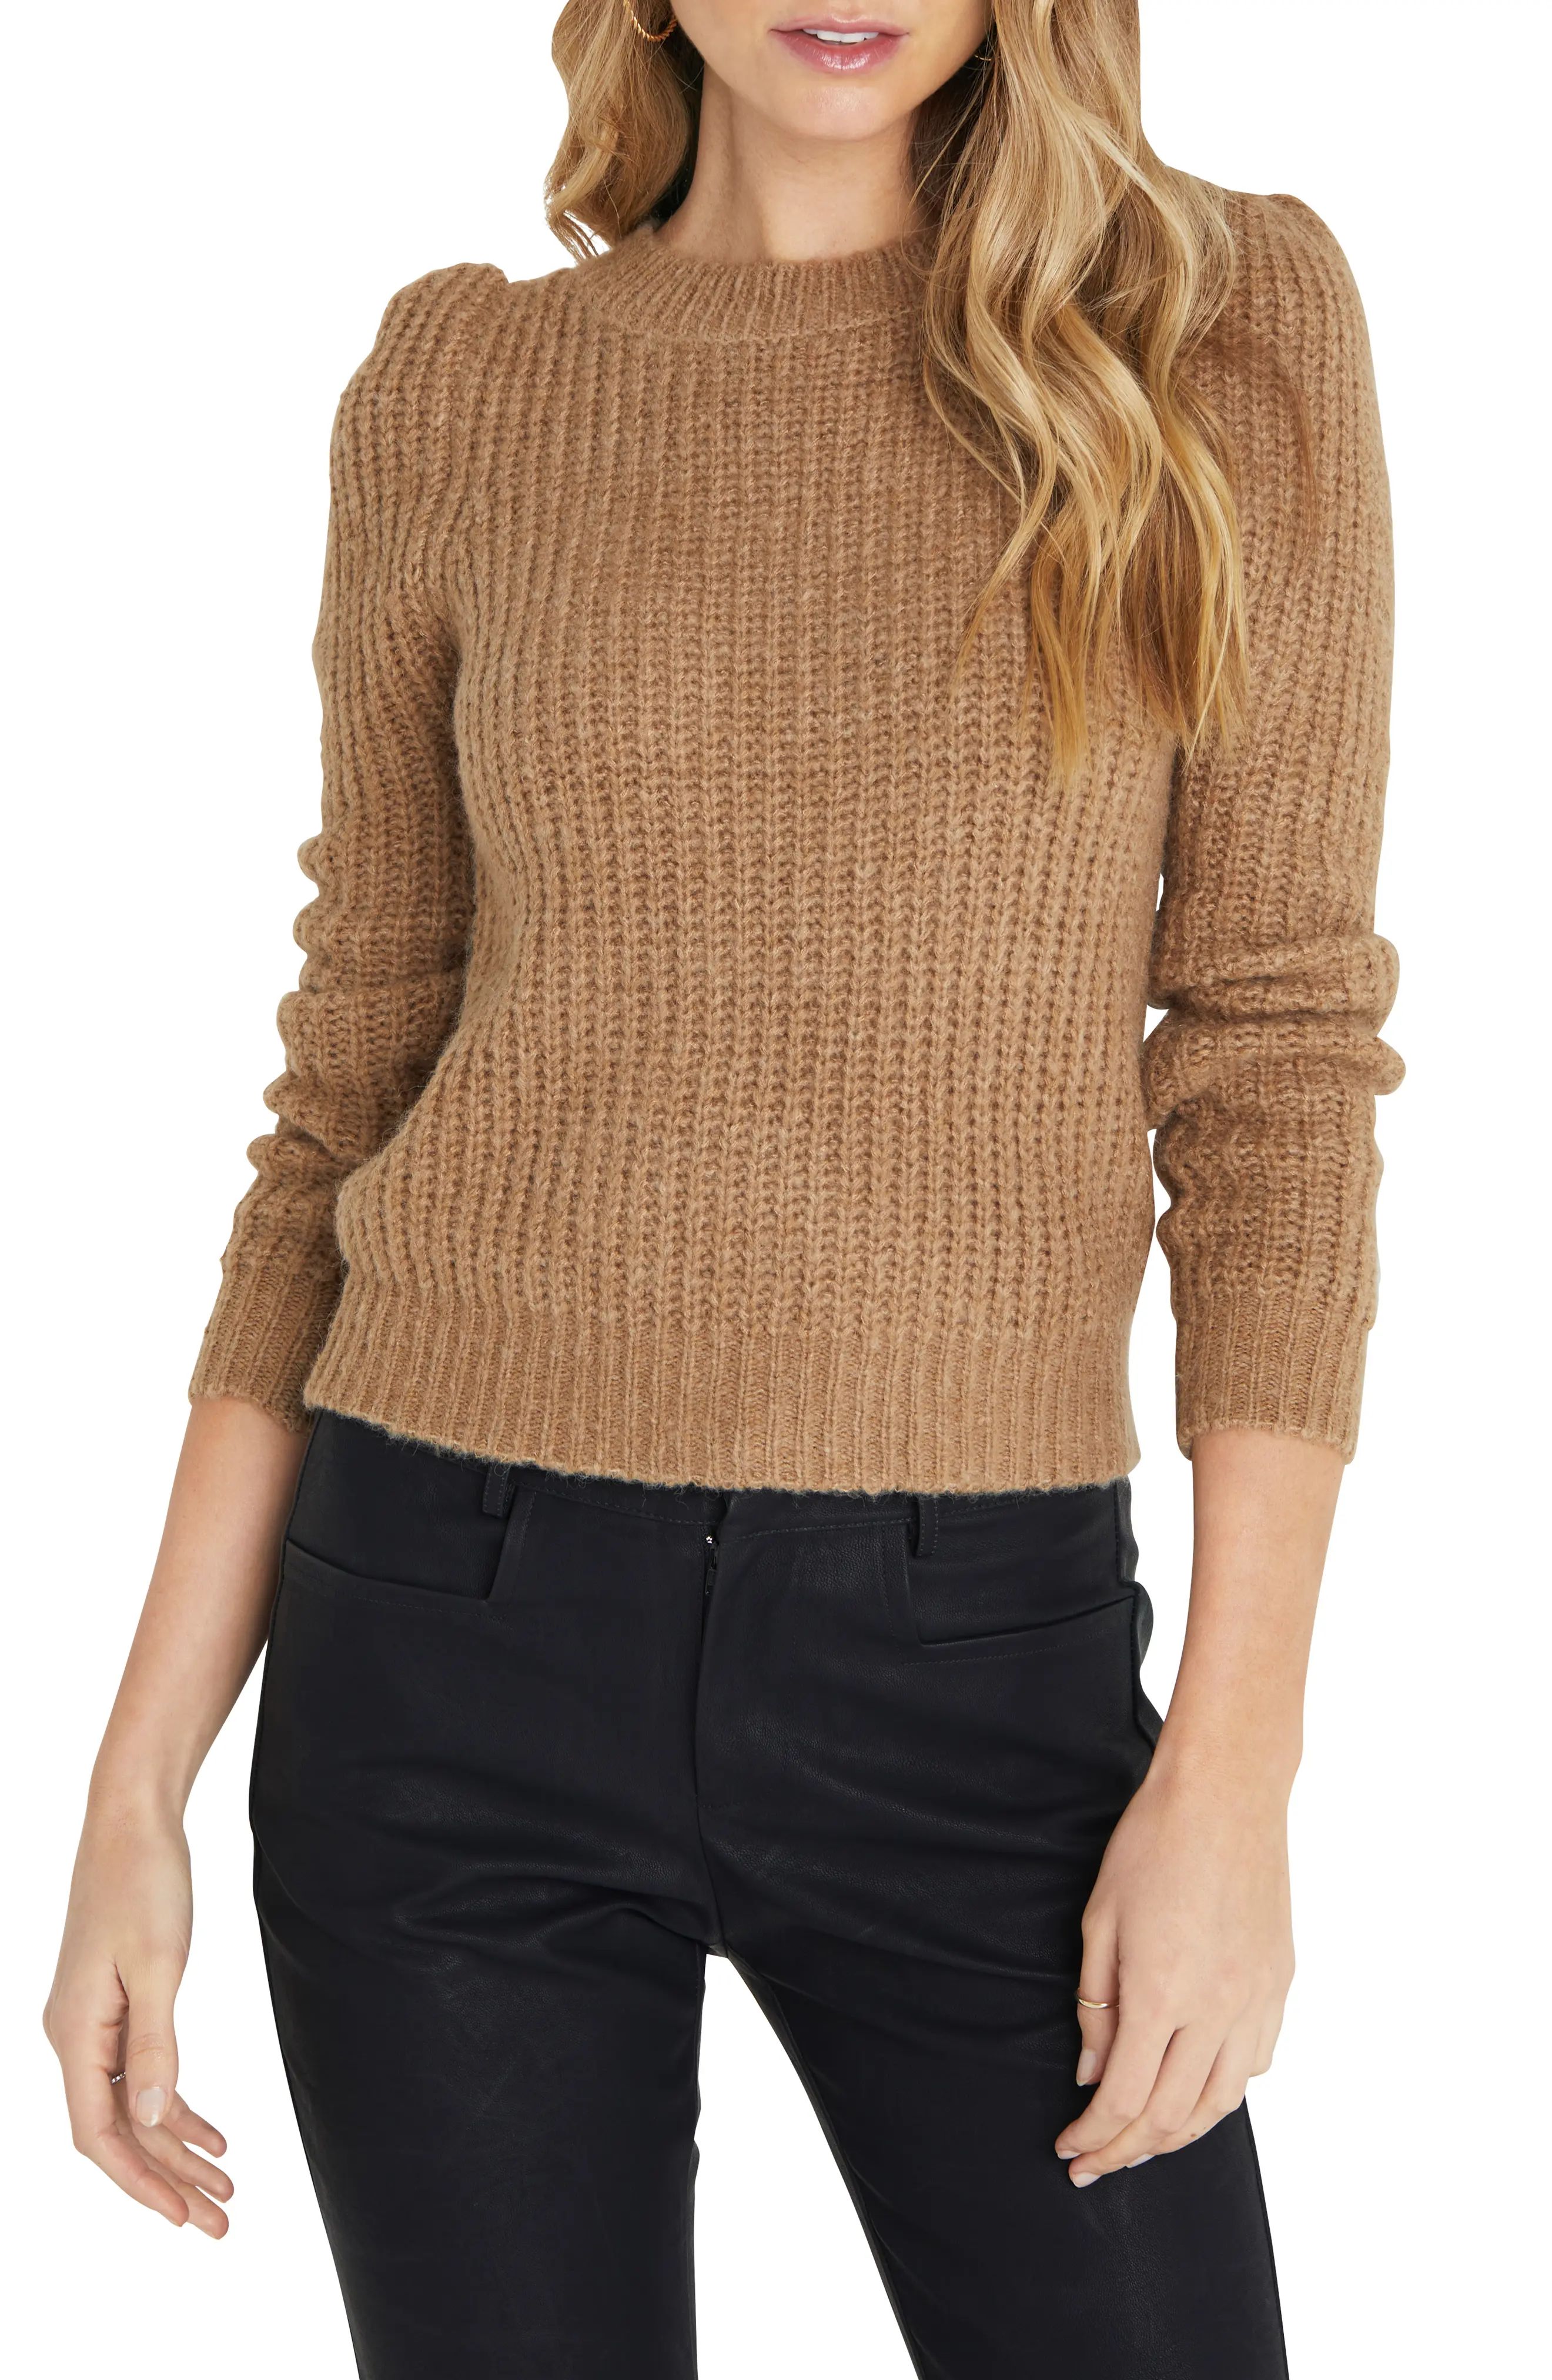 VICI Collection Puff Shoulder Sweater in Apple Cinnamon at Nordstrom, Size X-Large | Nordstrom